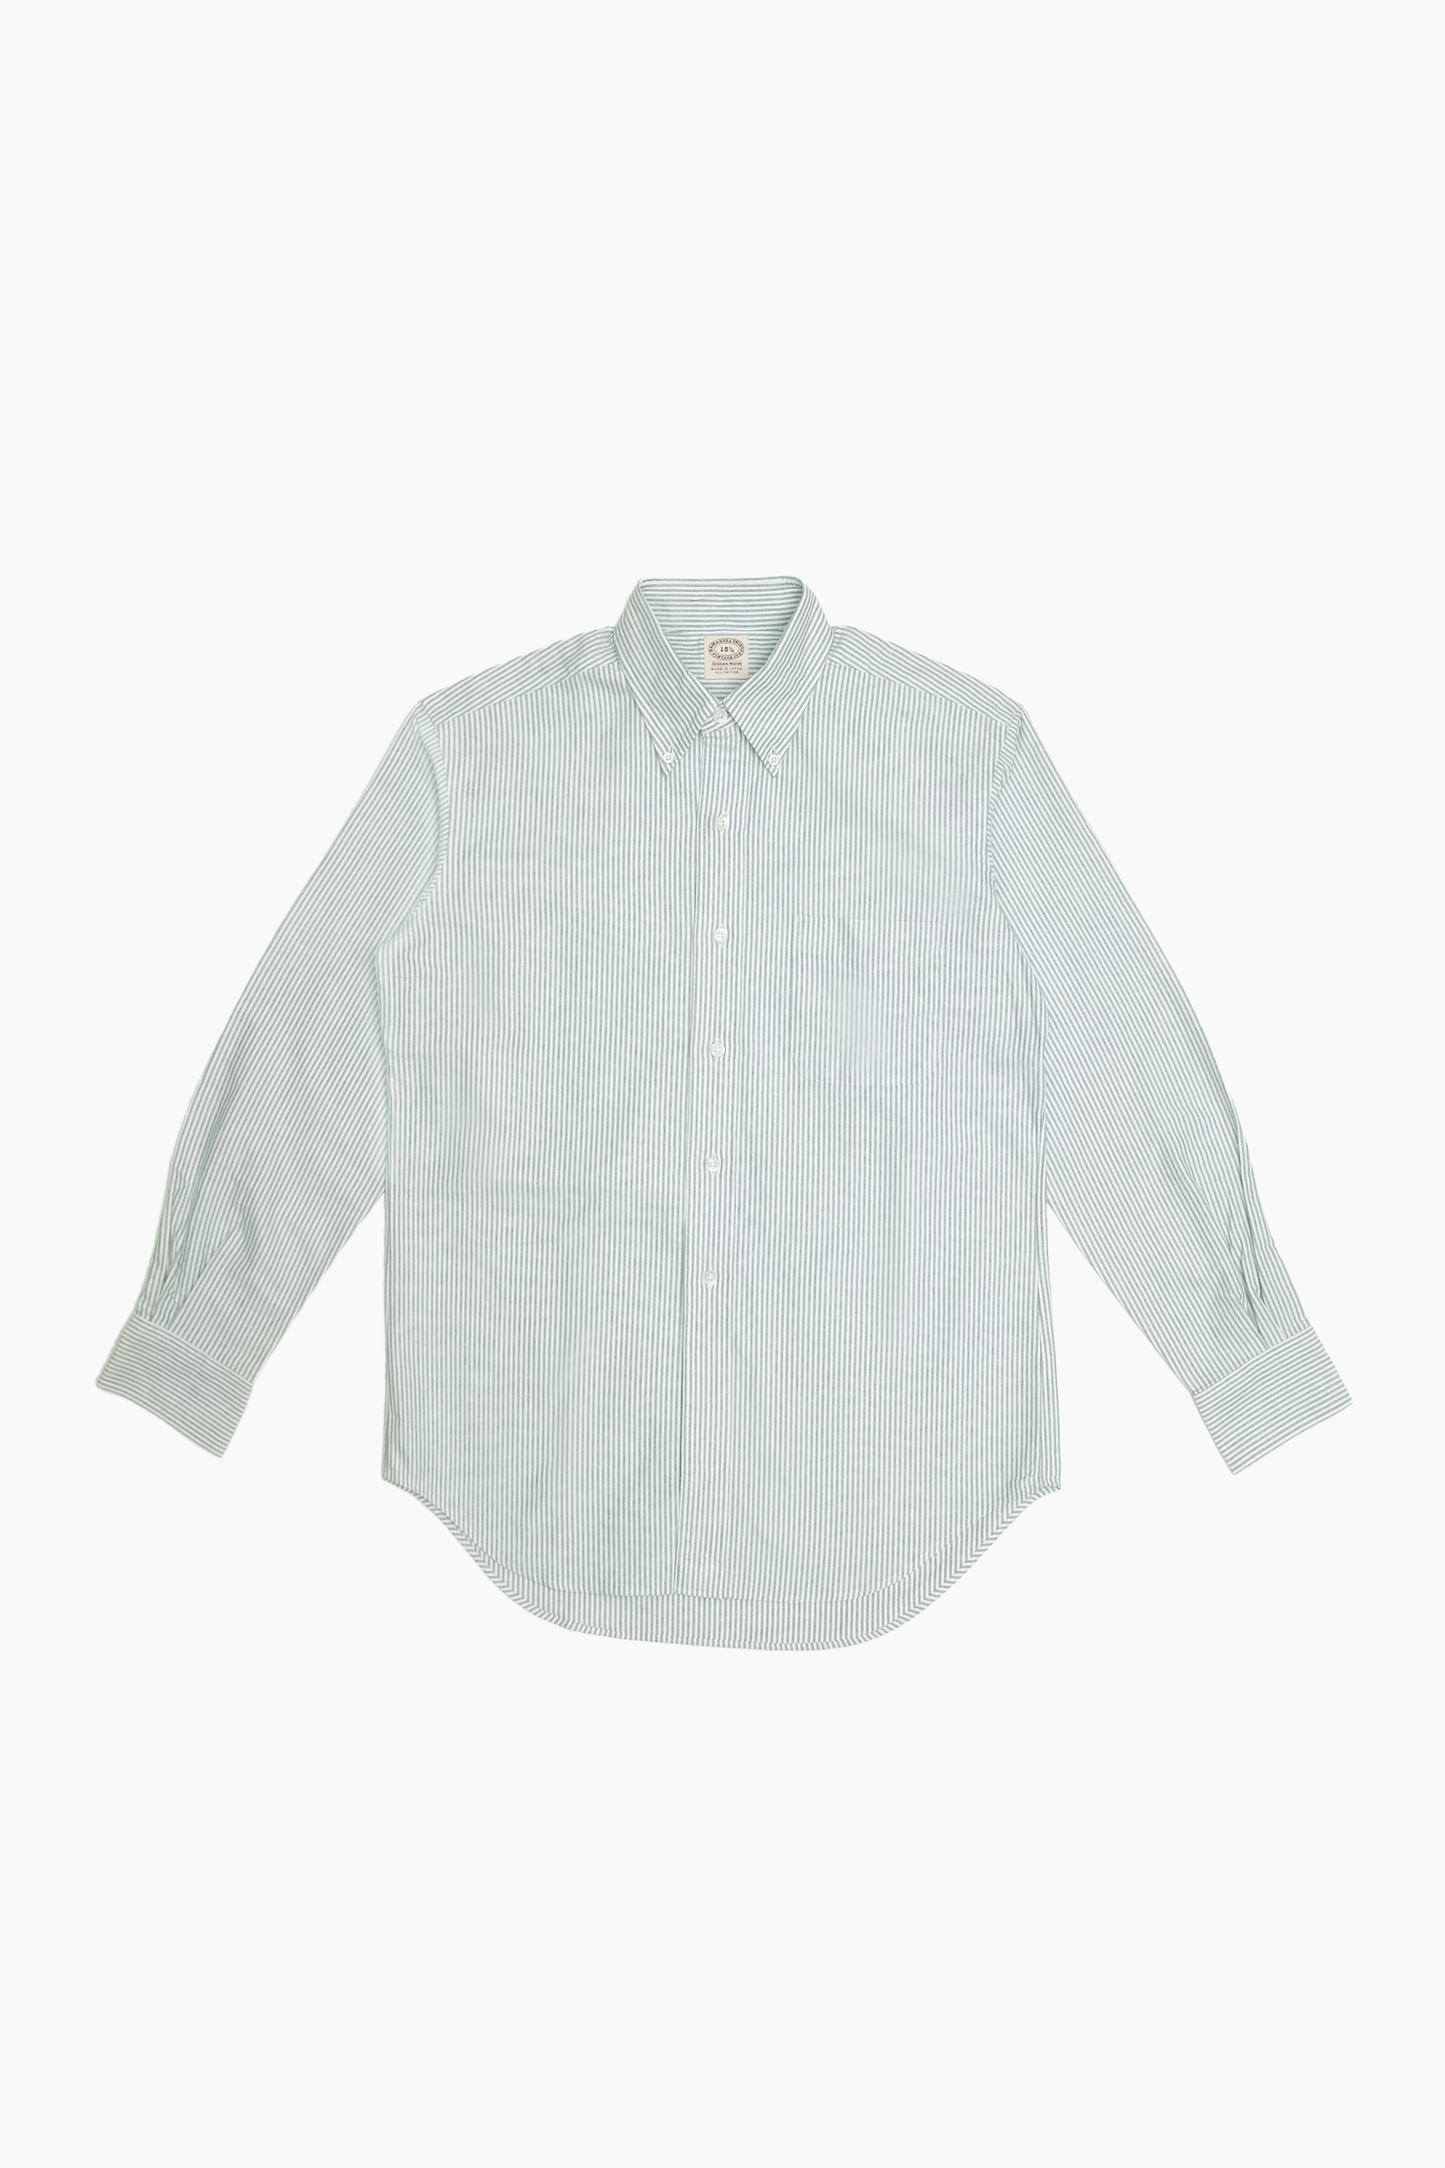 'Vintage Ivy' Shirt in green striped oxford